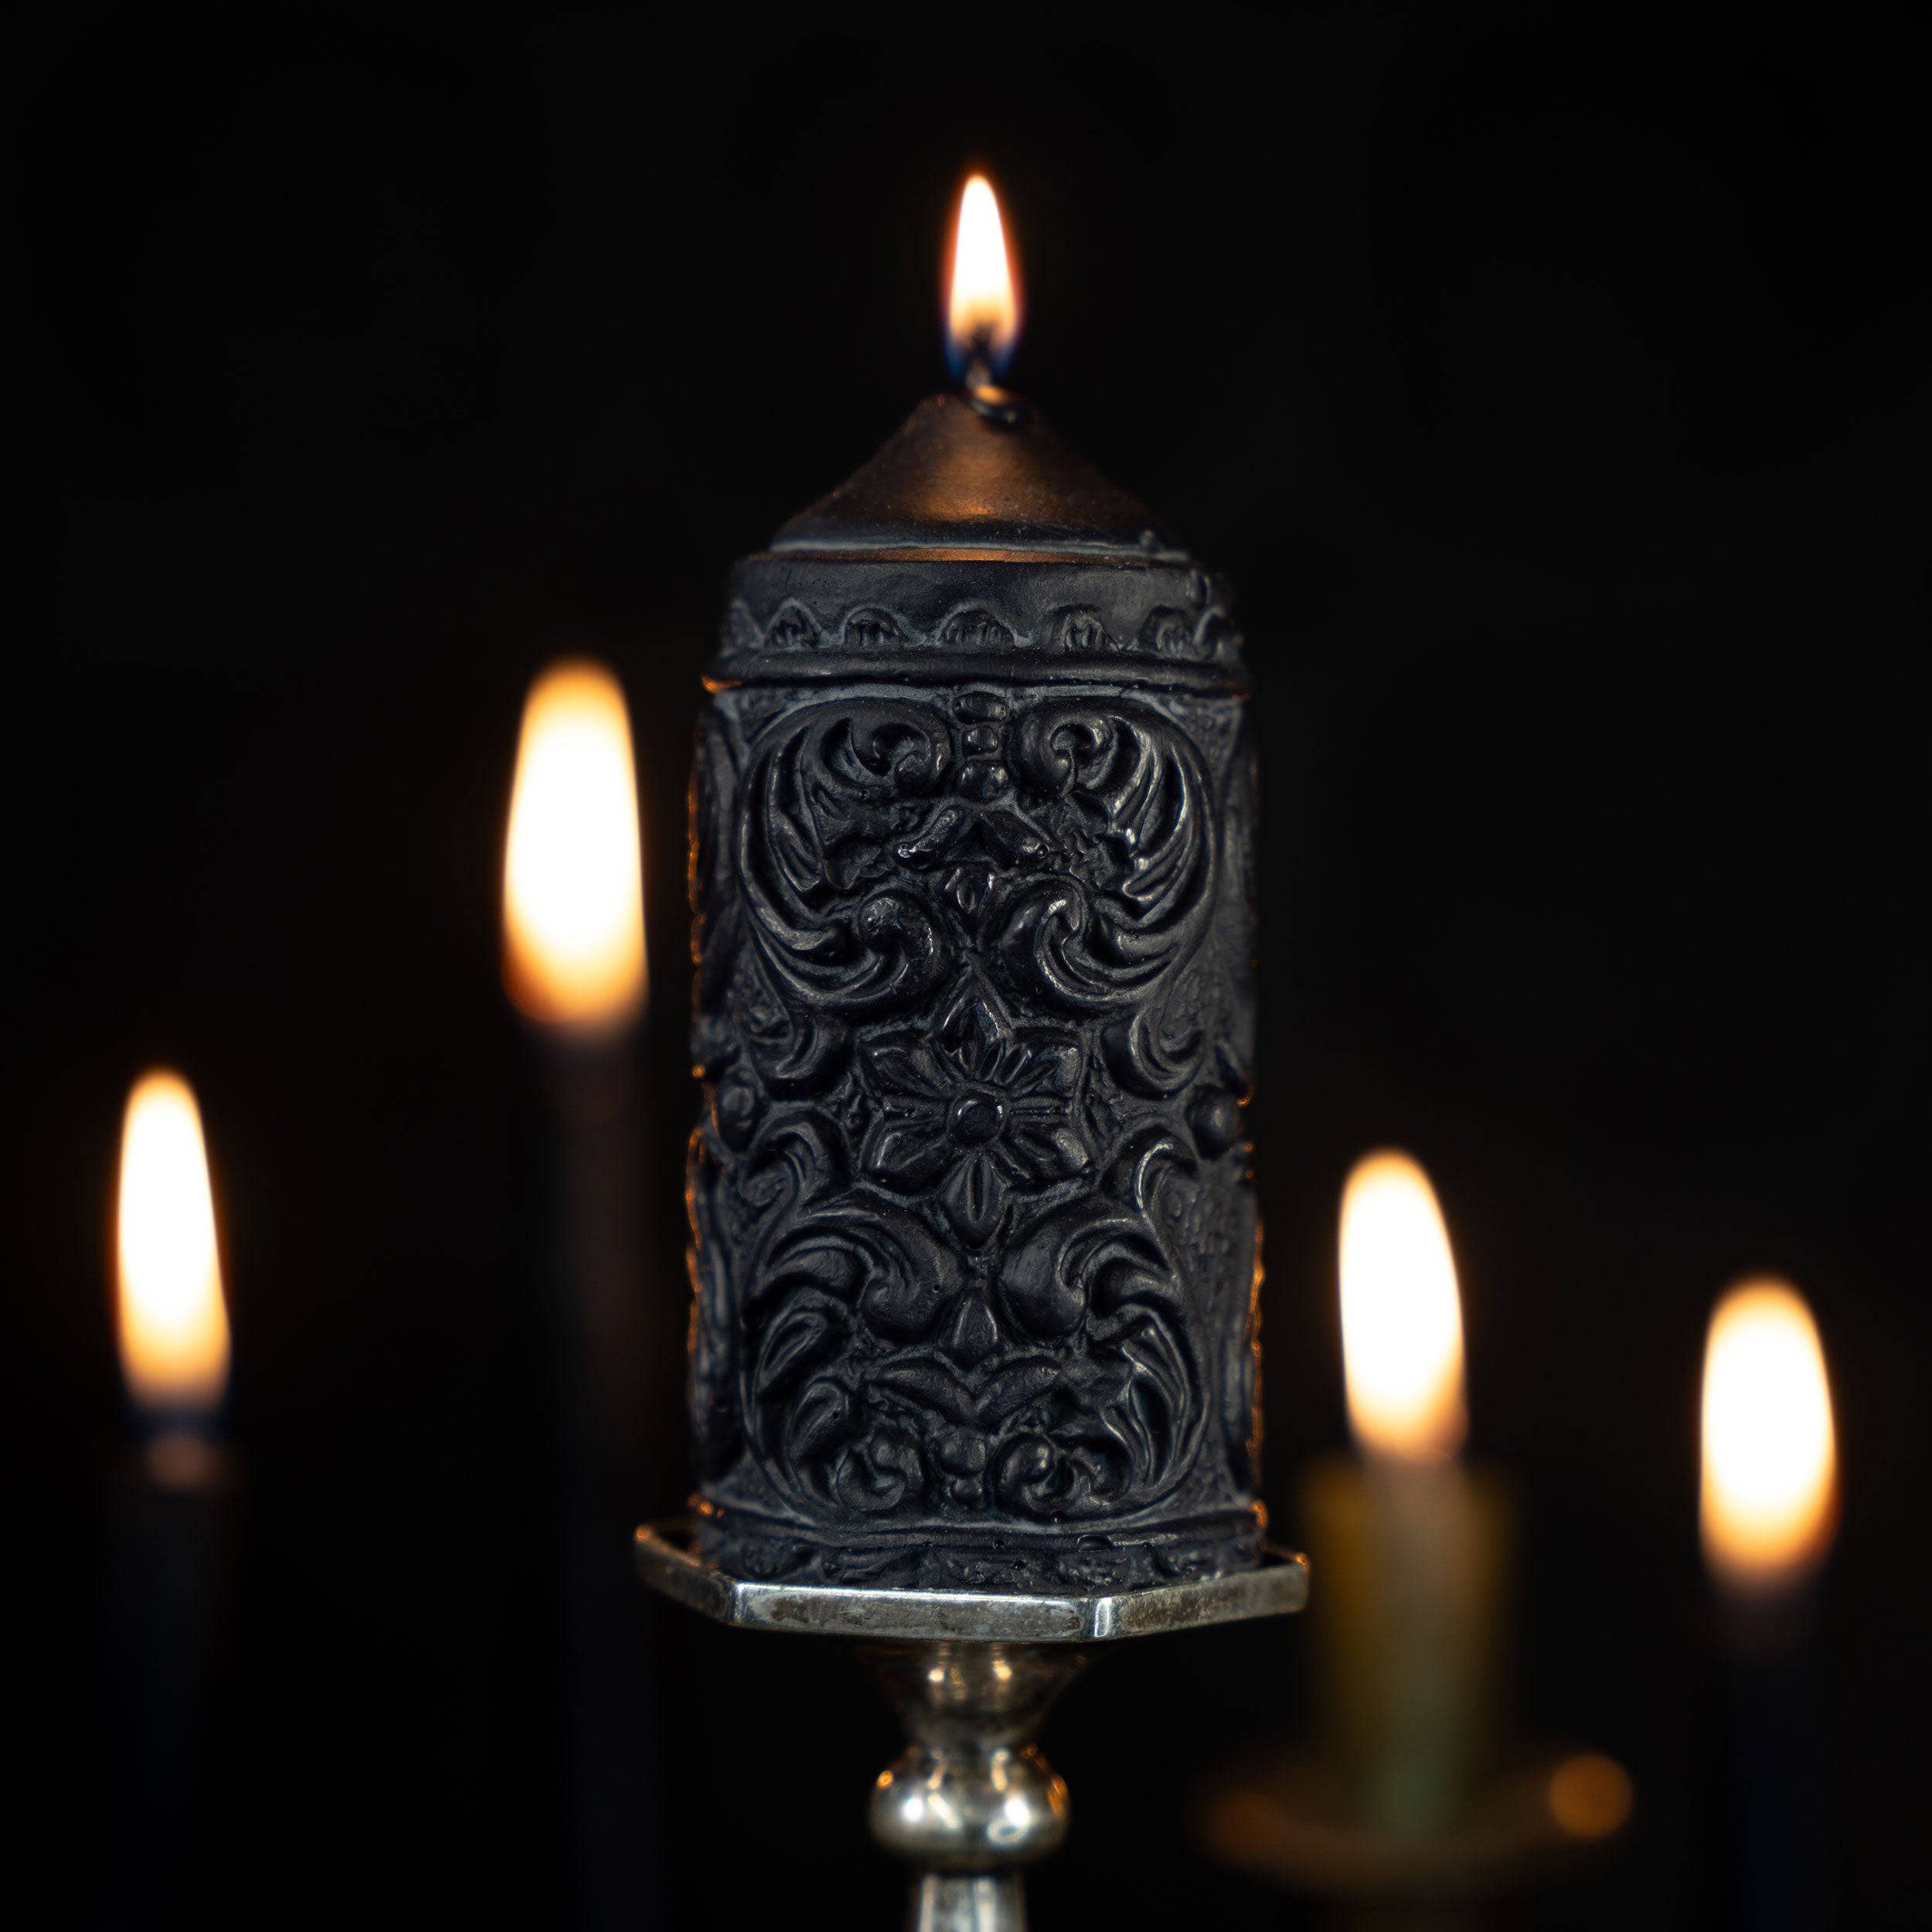 mildred gothic candle - the blackened teeth - gothic home decor